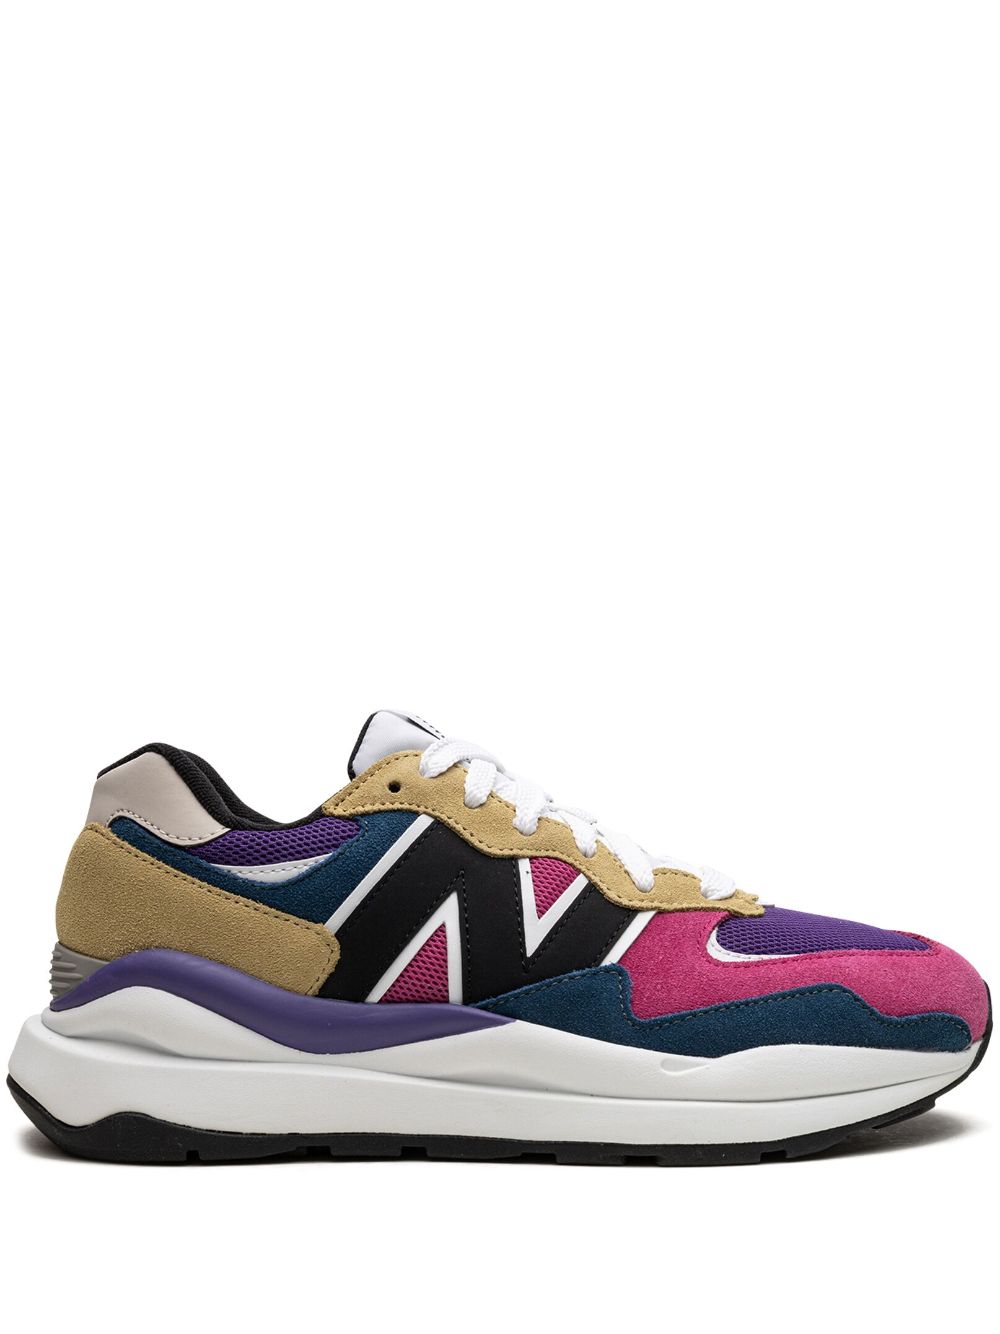 New Balance 57/40 "Green" sneakers - Pink